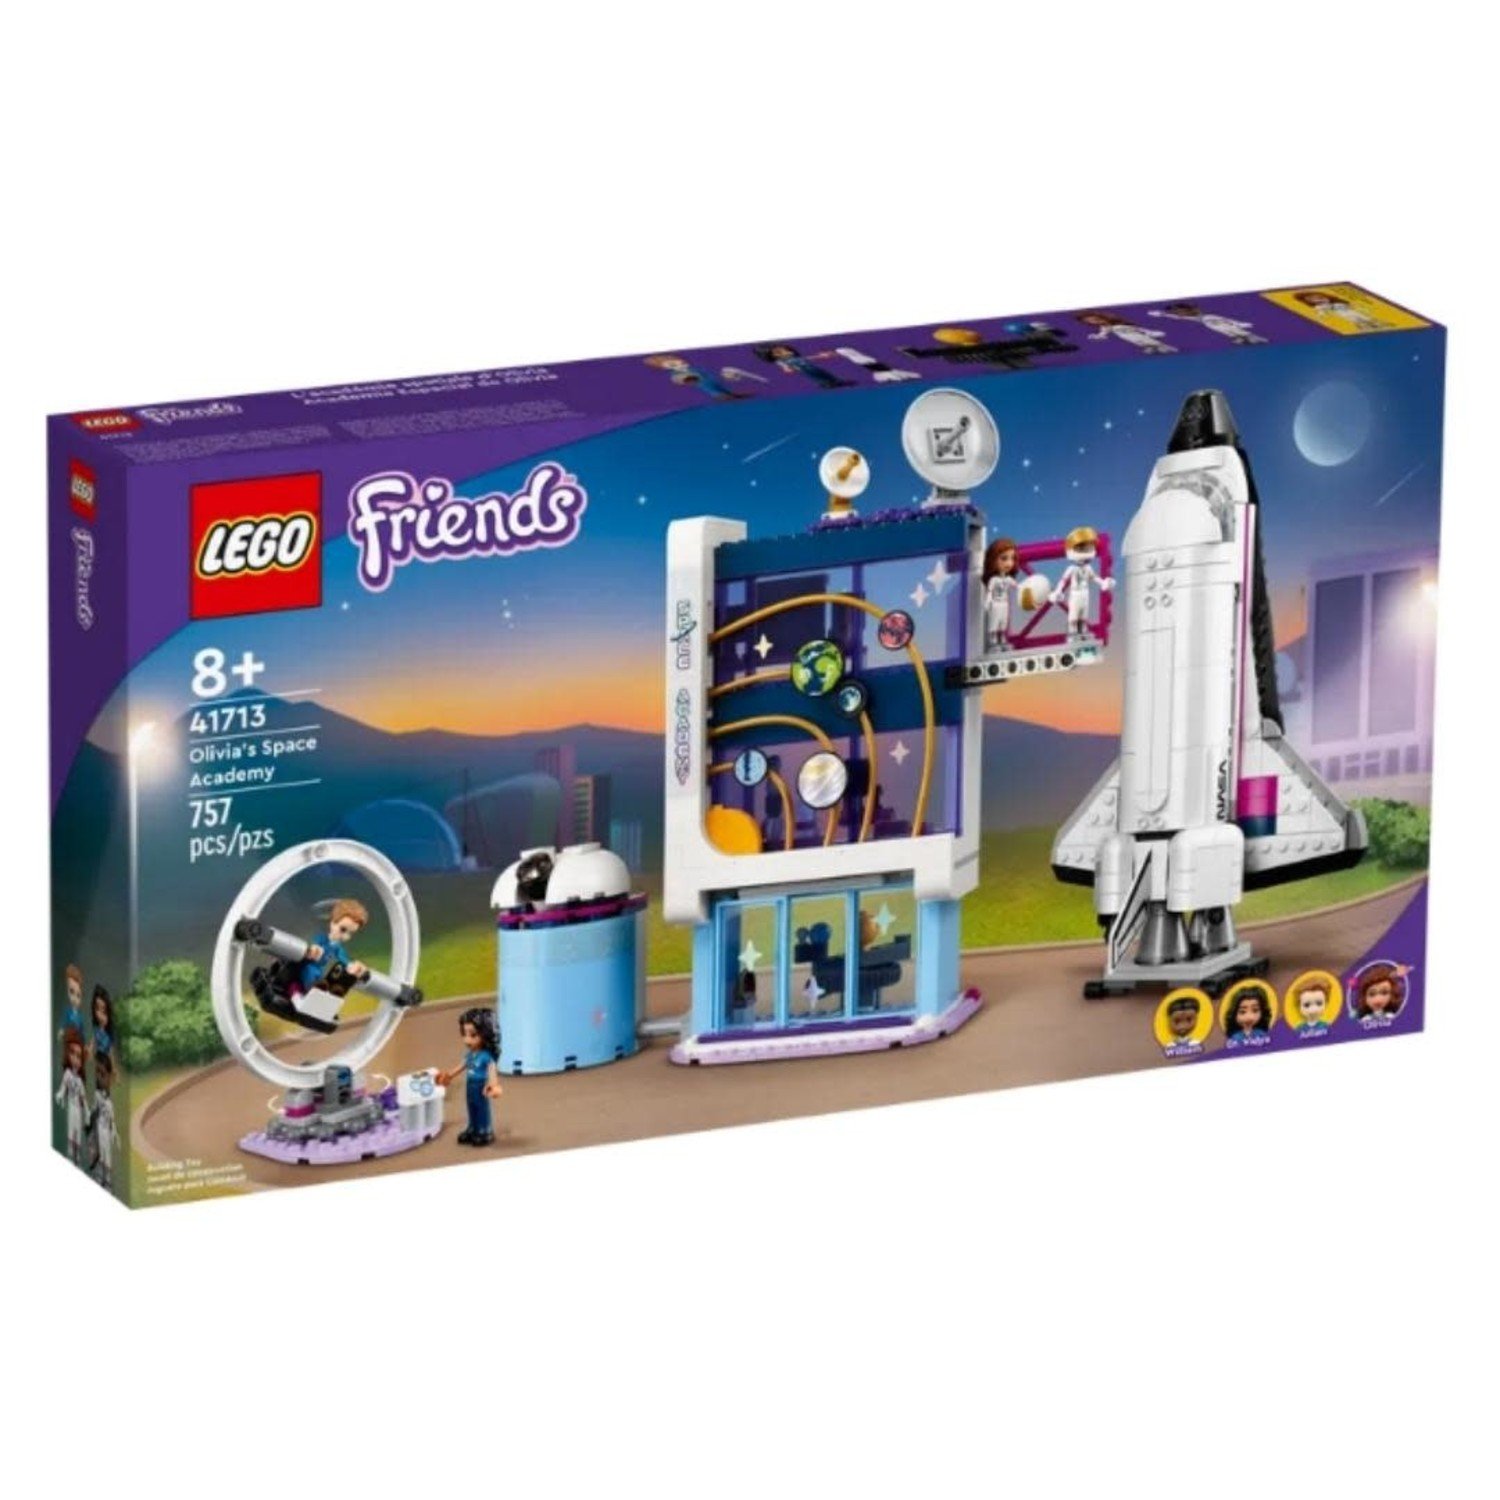 Olivia's Space Academy LEGO Friends - Mudpuddles Toys and Books